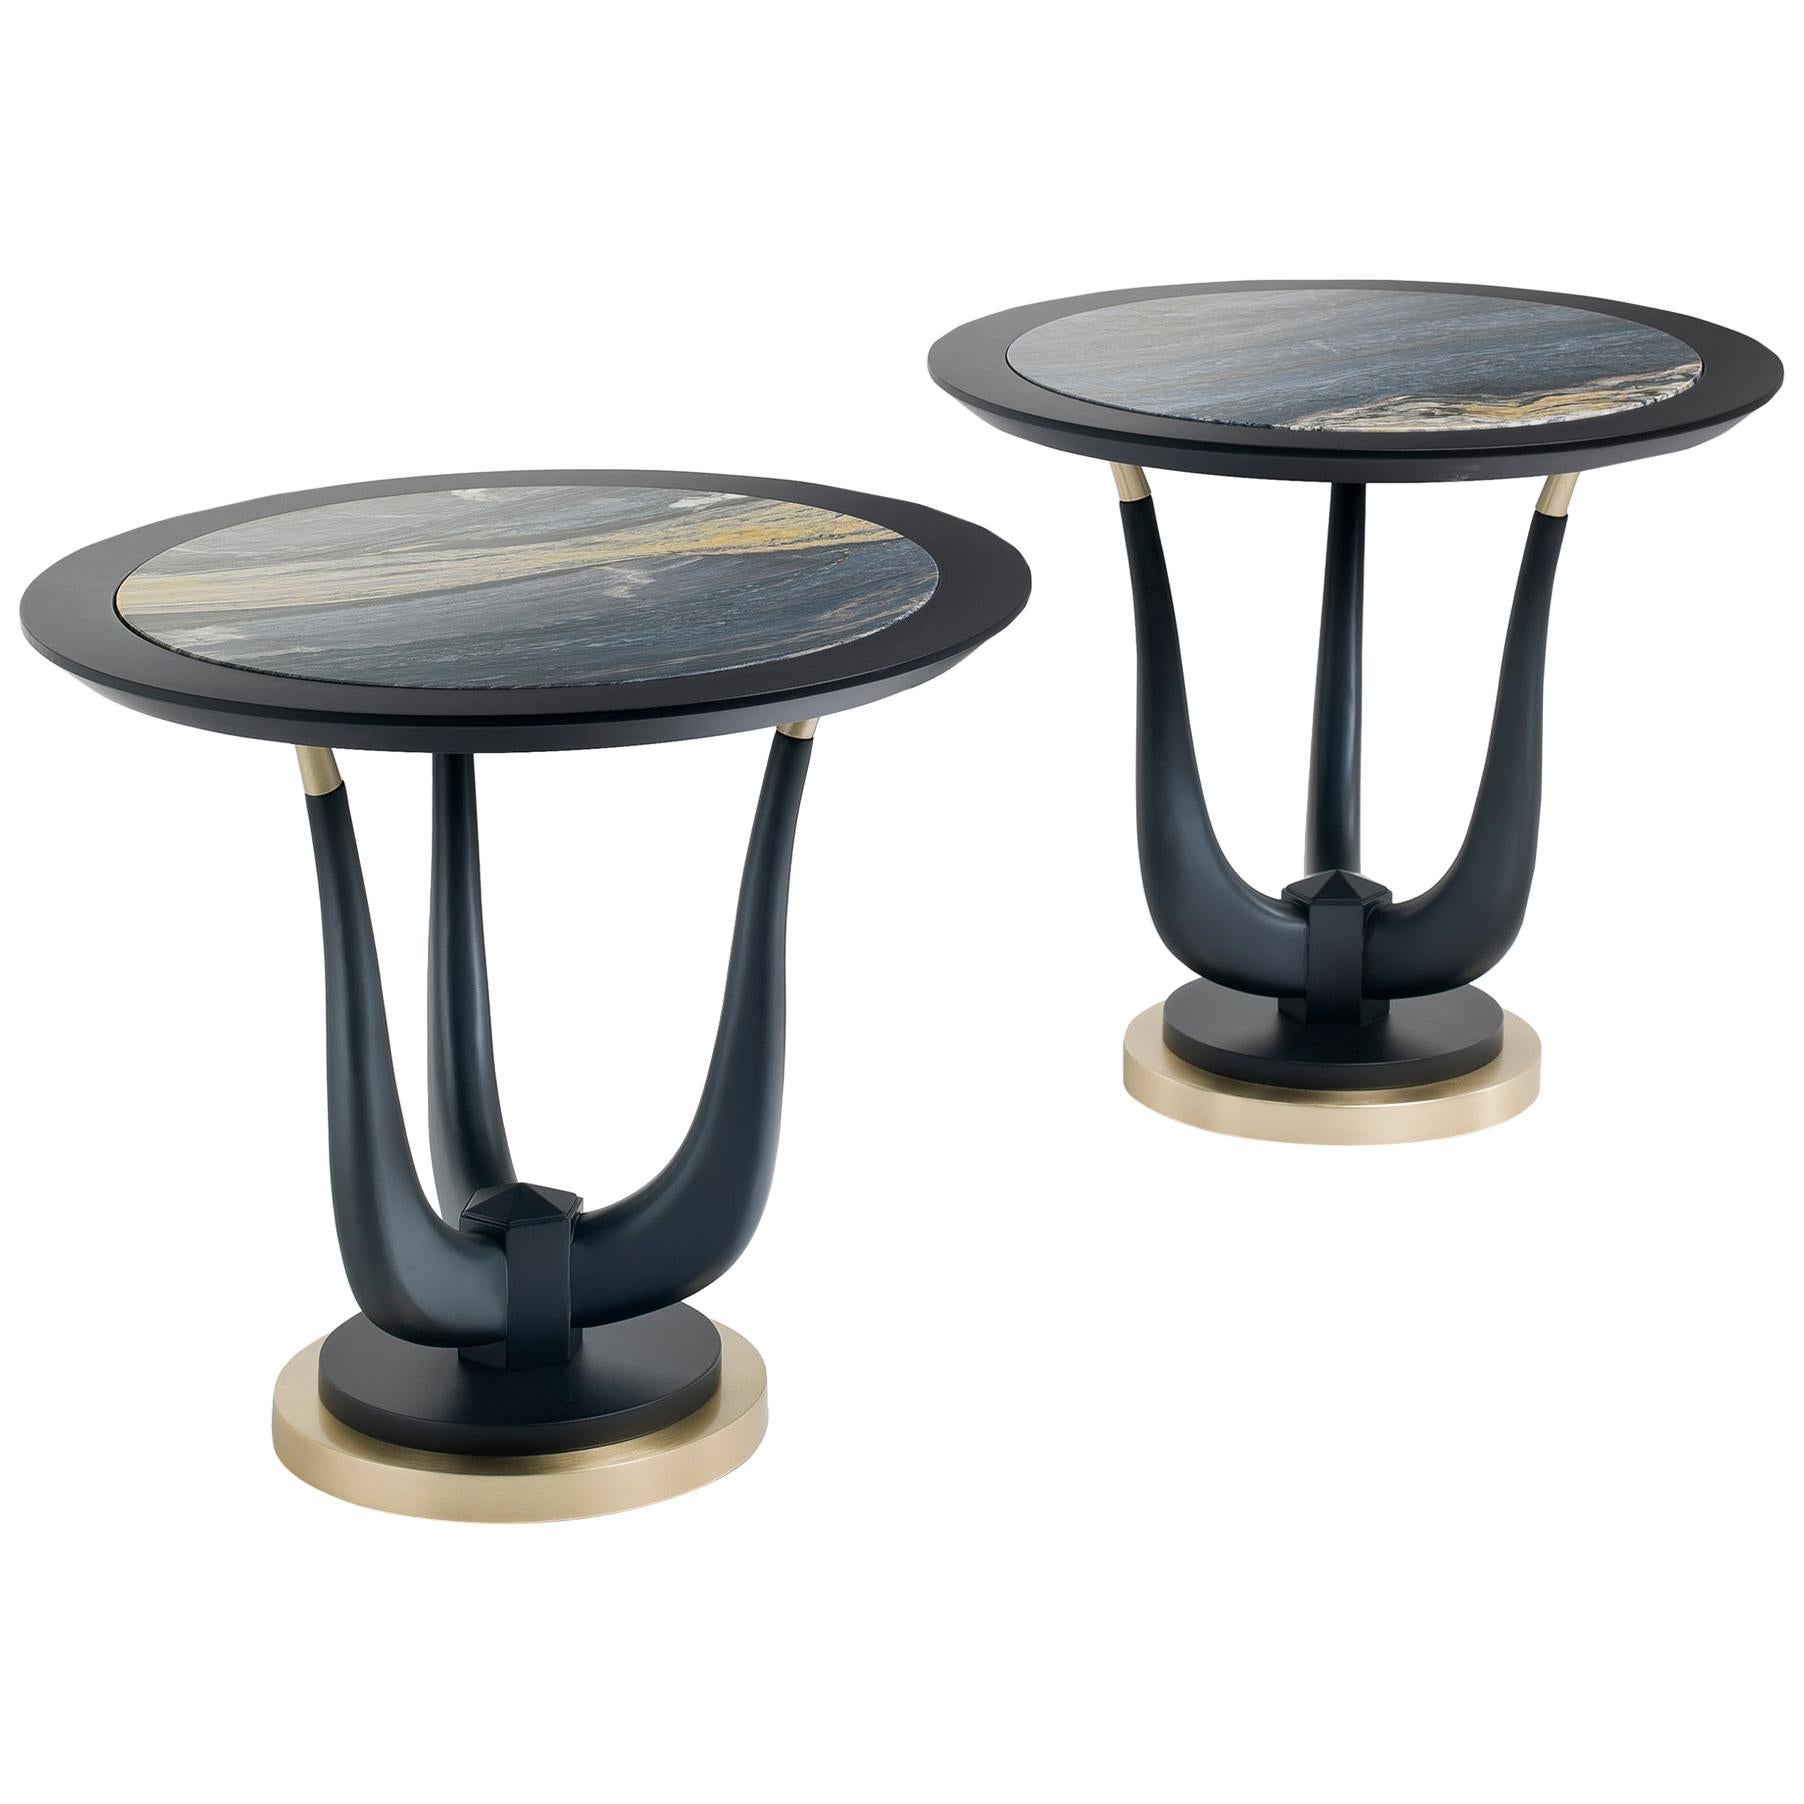 Poseidon Black Side Table in Matt Black Lacquered Finish and Blue Marble Top For Sale